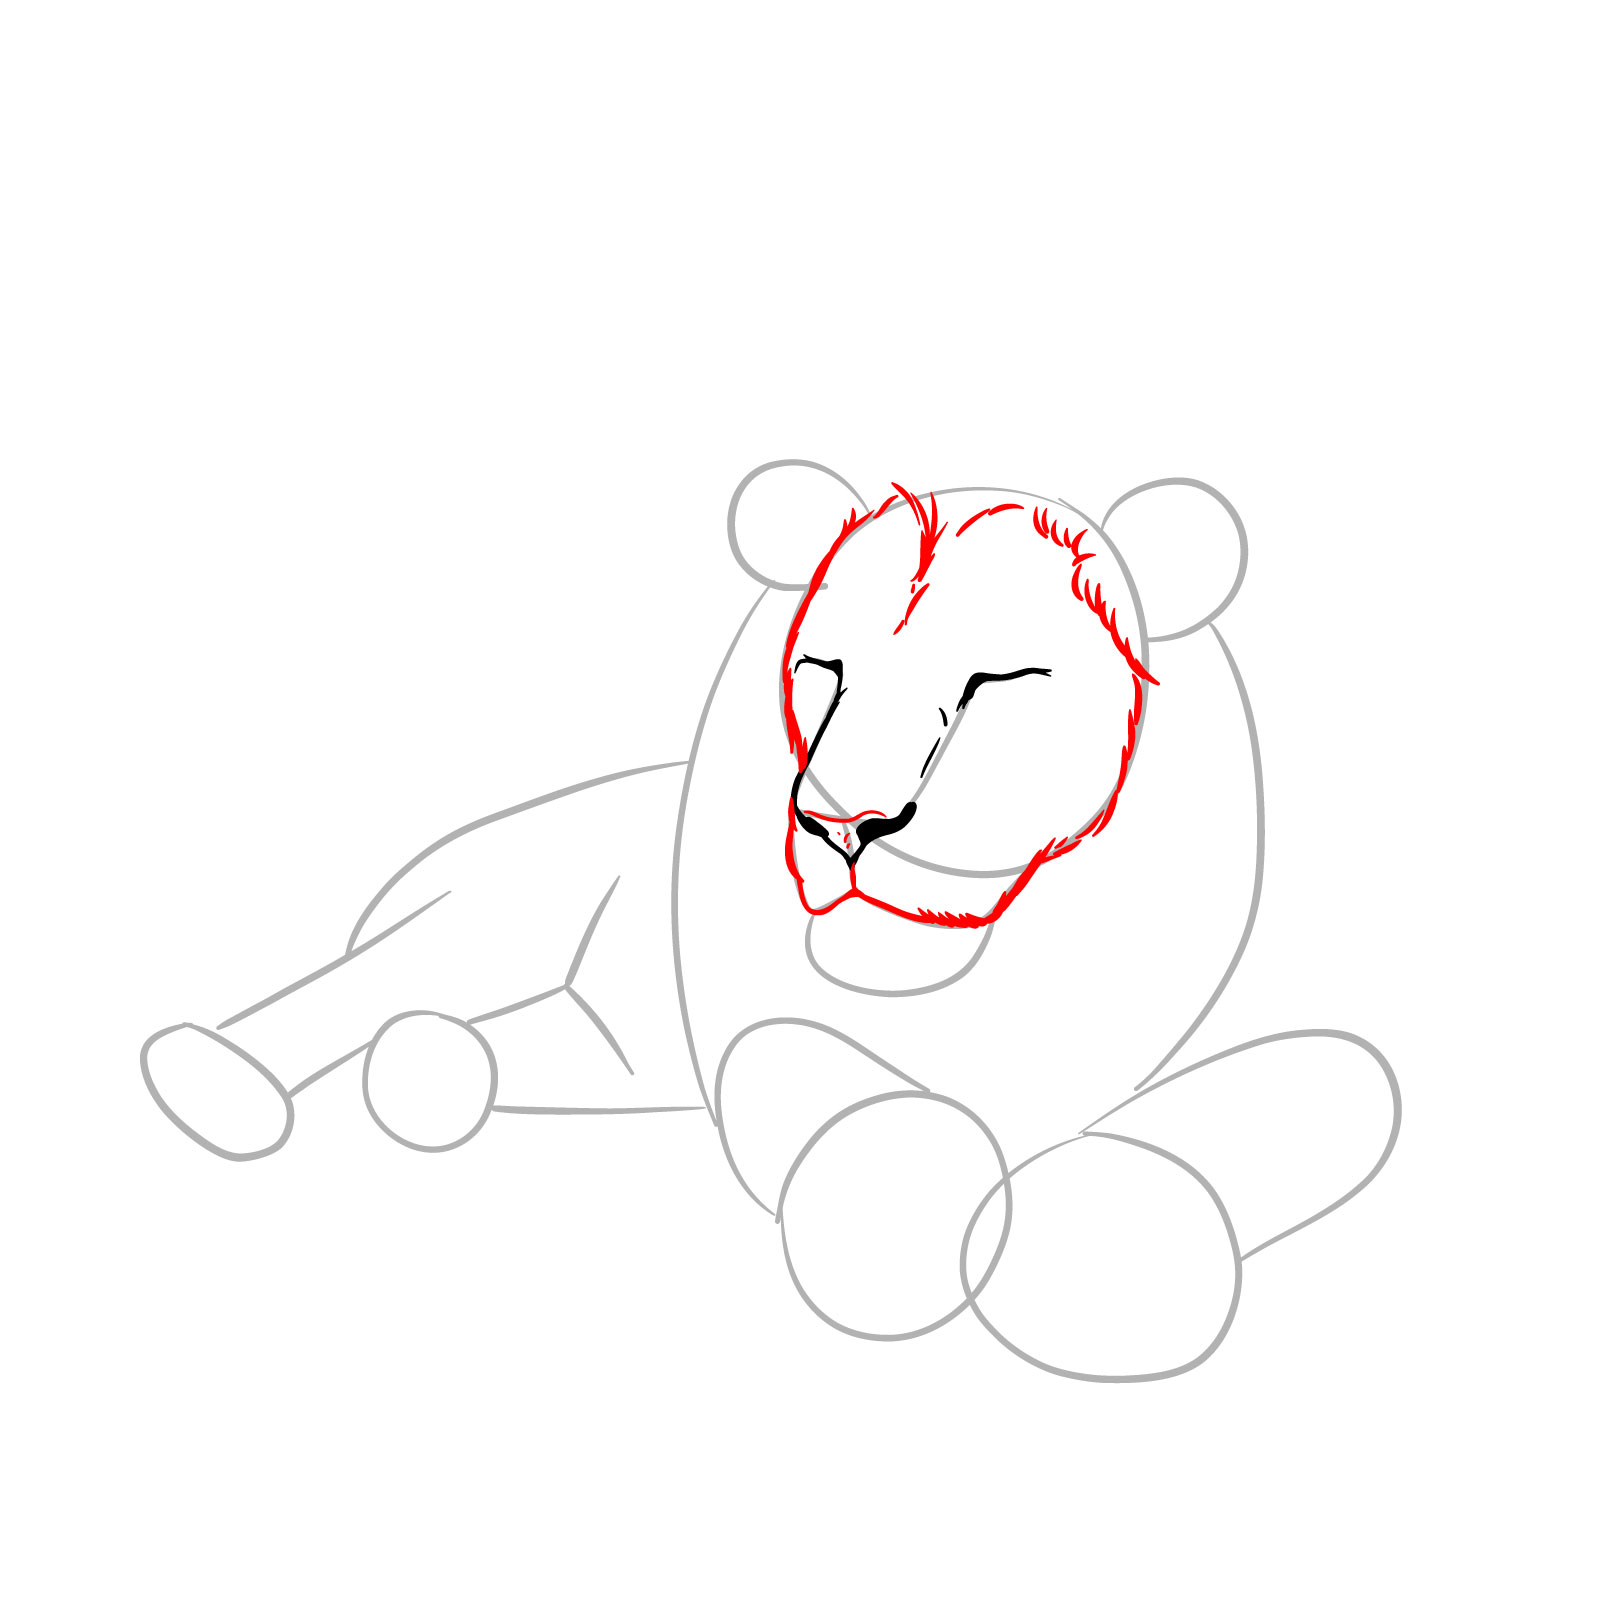 Sleeping lion drawing - Step 4: Defining the facial frame